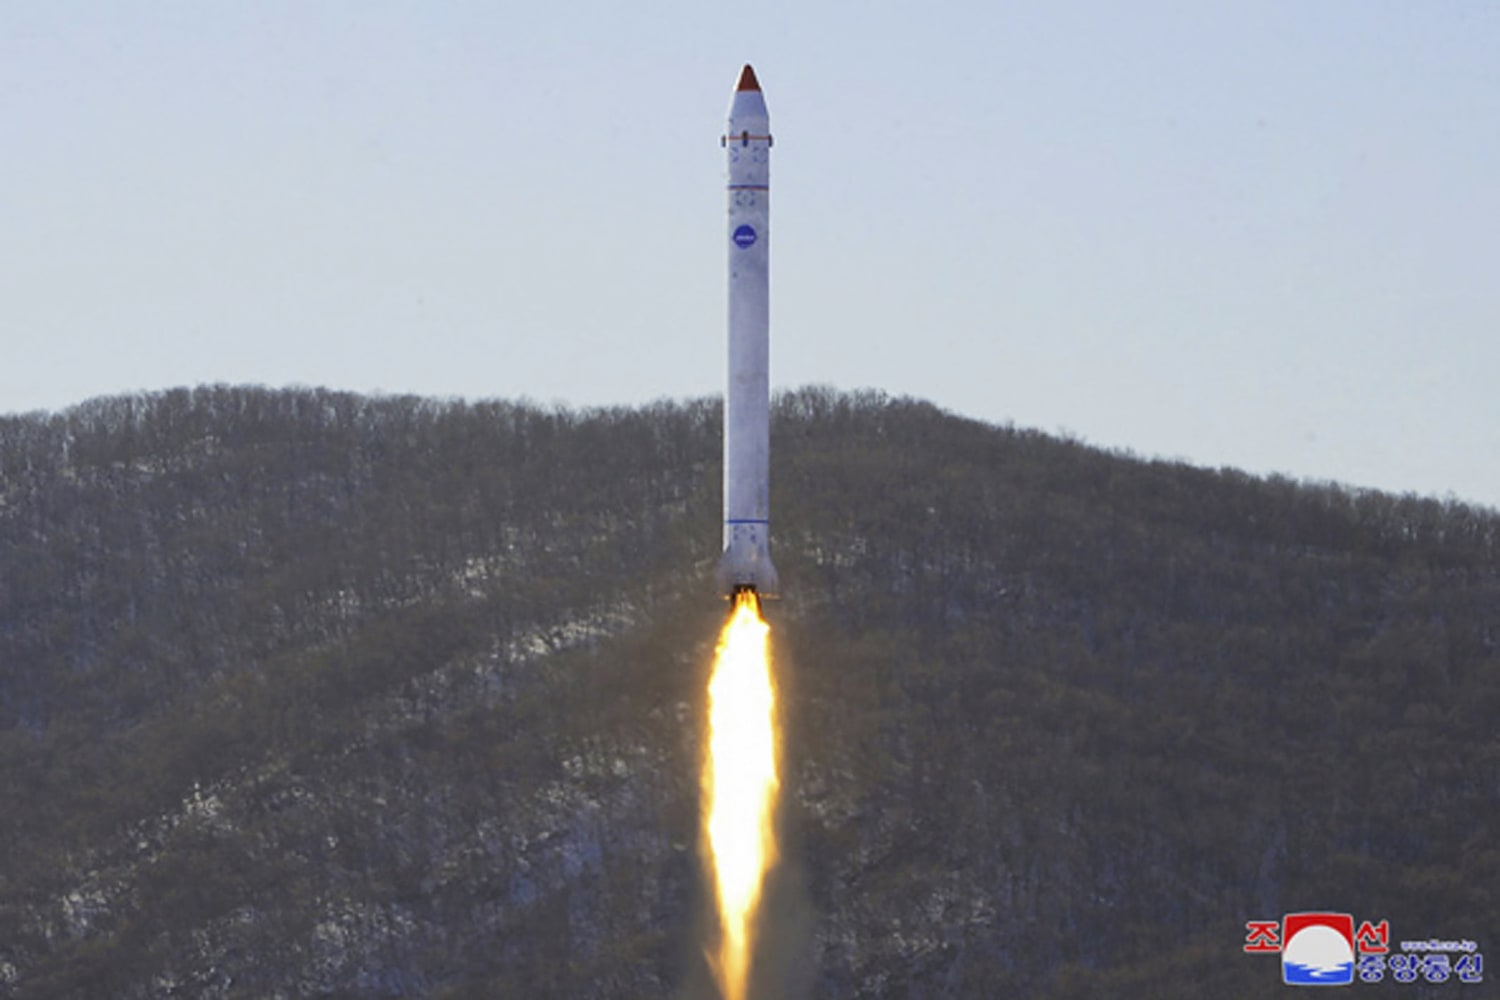 North Korea says latest launches tested 1st spy satellite